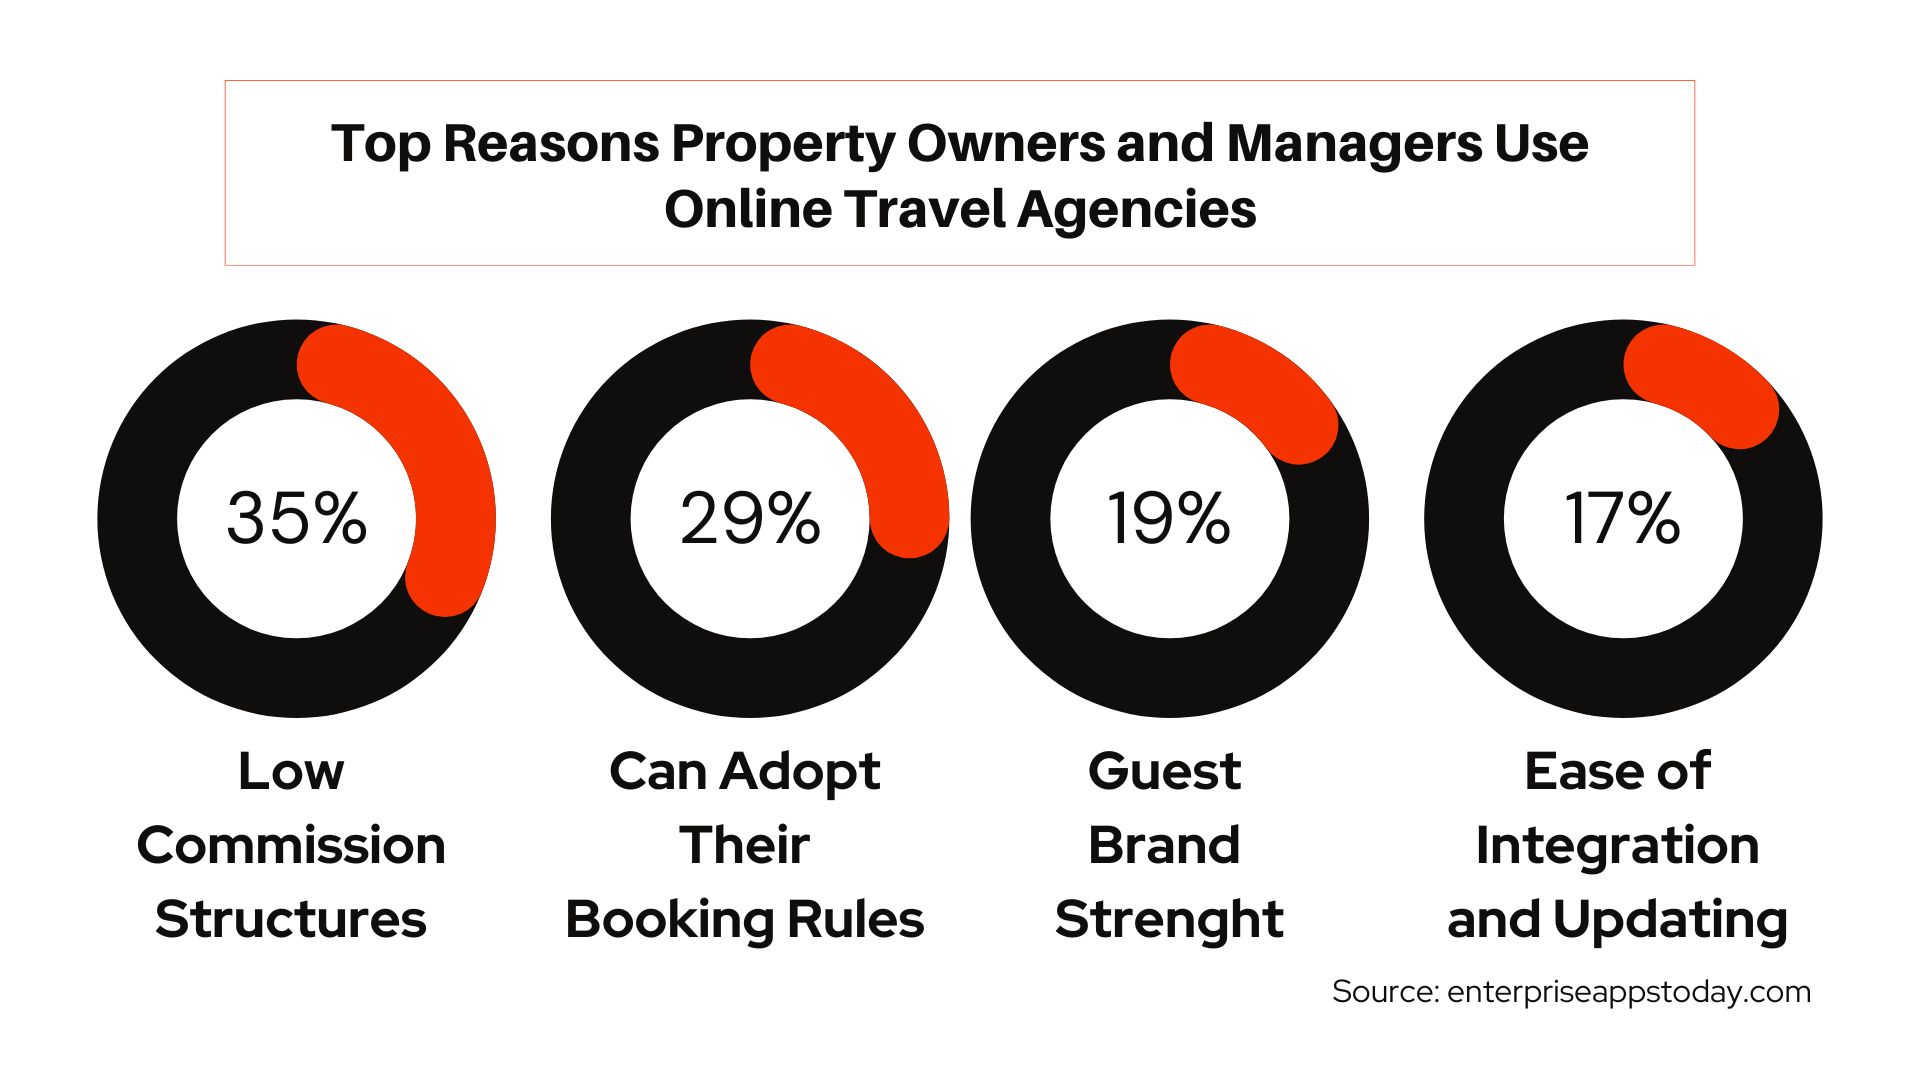 Top Reasons Property Owners and Managers Use Online Travel Agencies